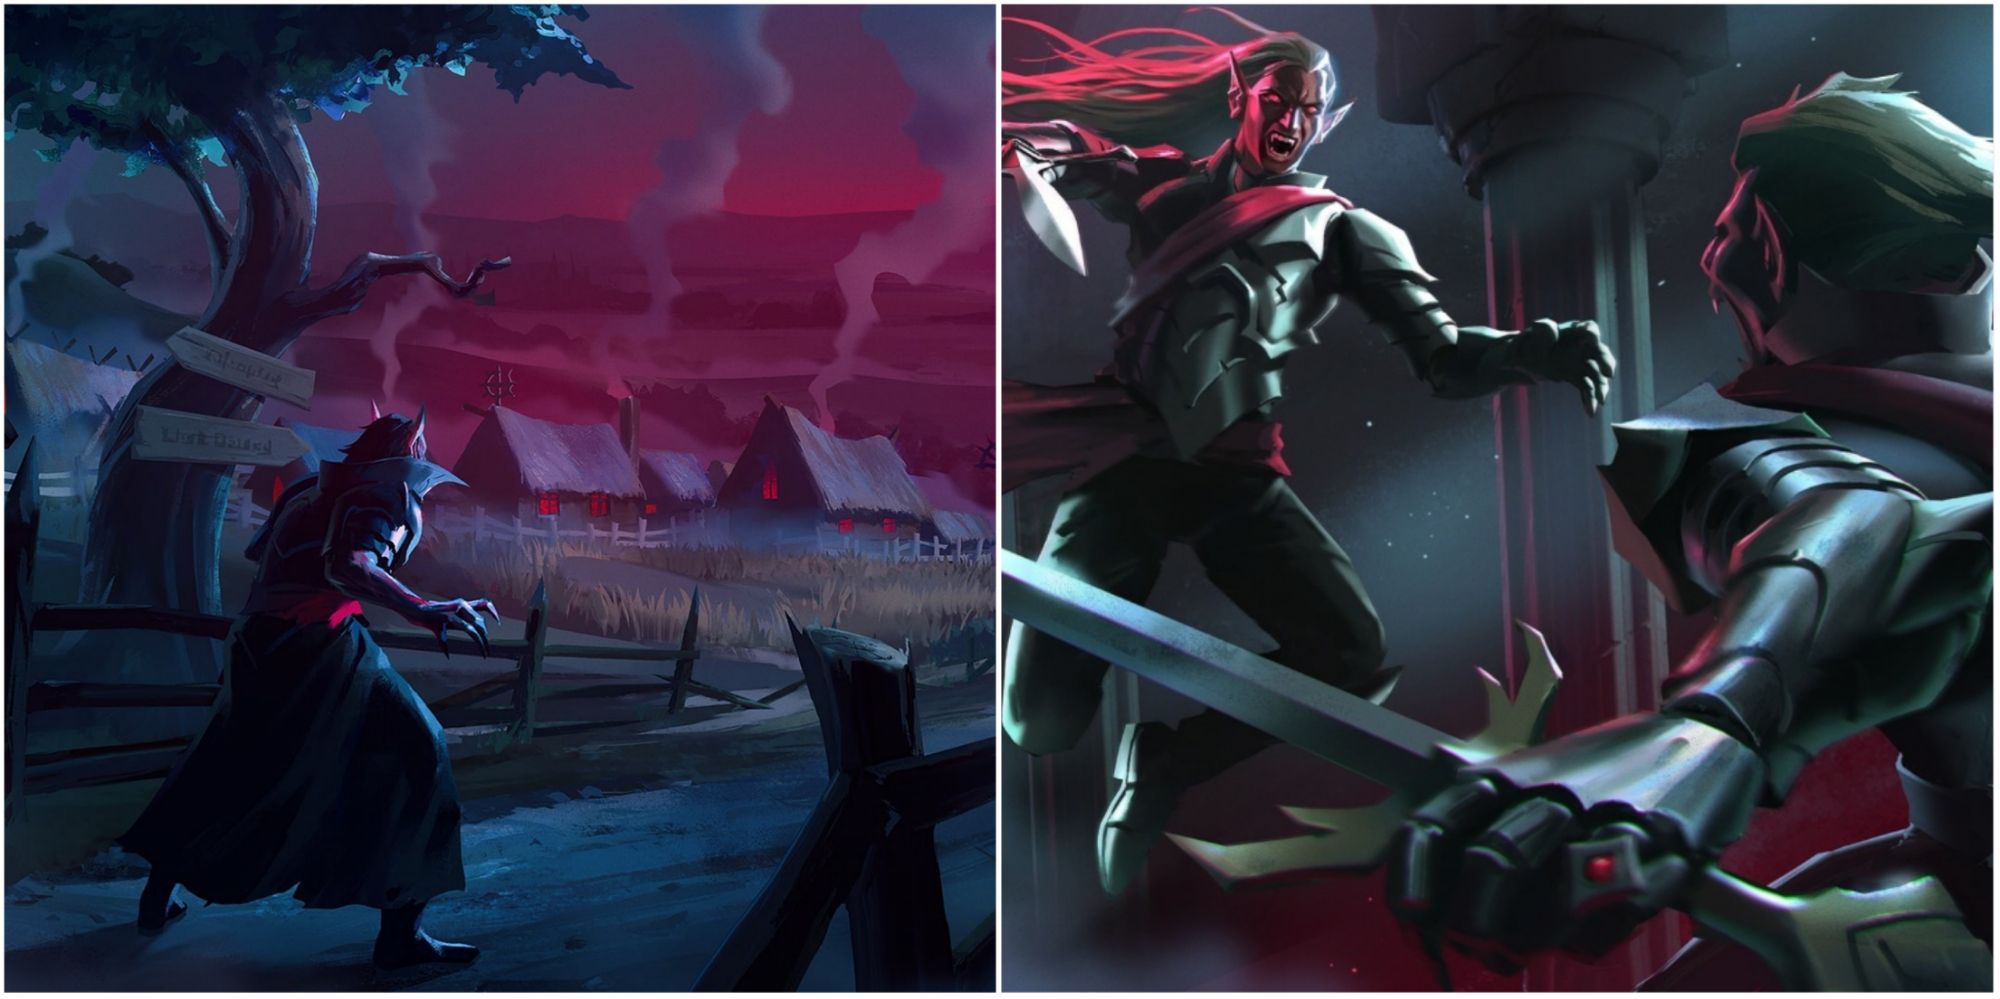 A split image of a vampire approaching a village under a blood moon, and a vampire leaping at another vampire with swords drawn